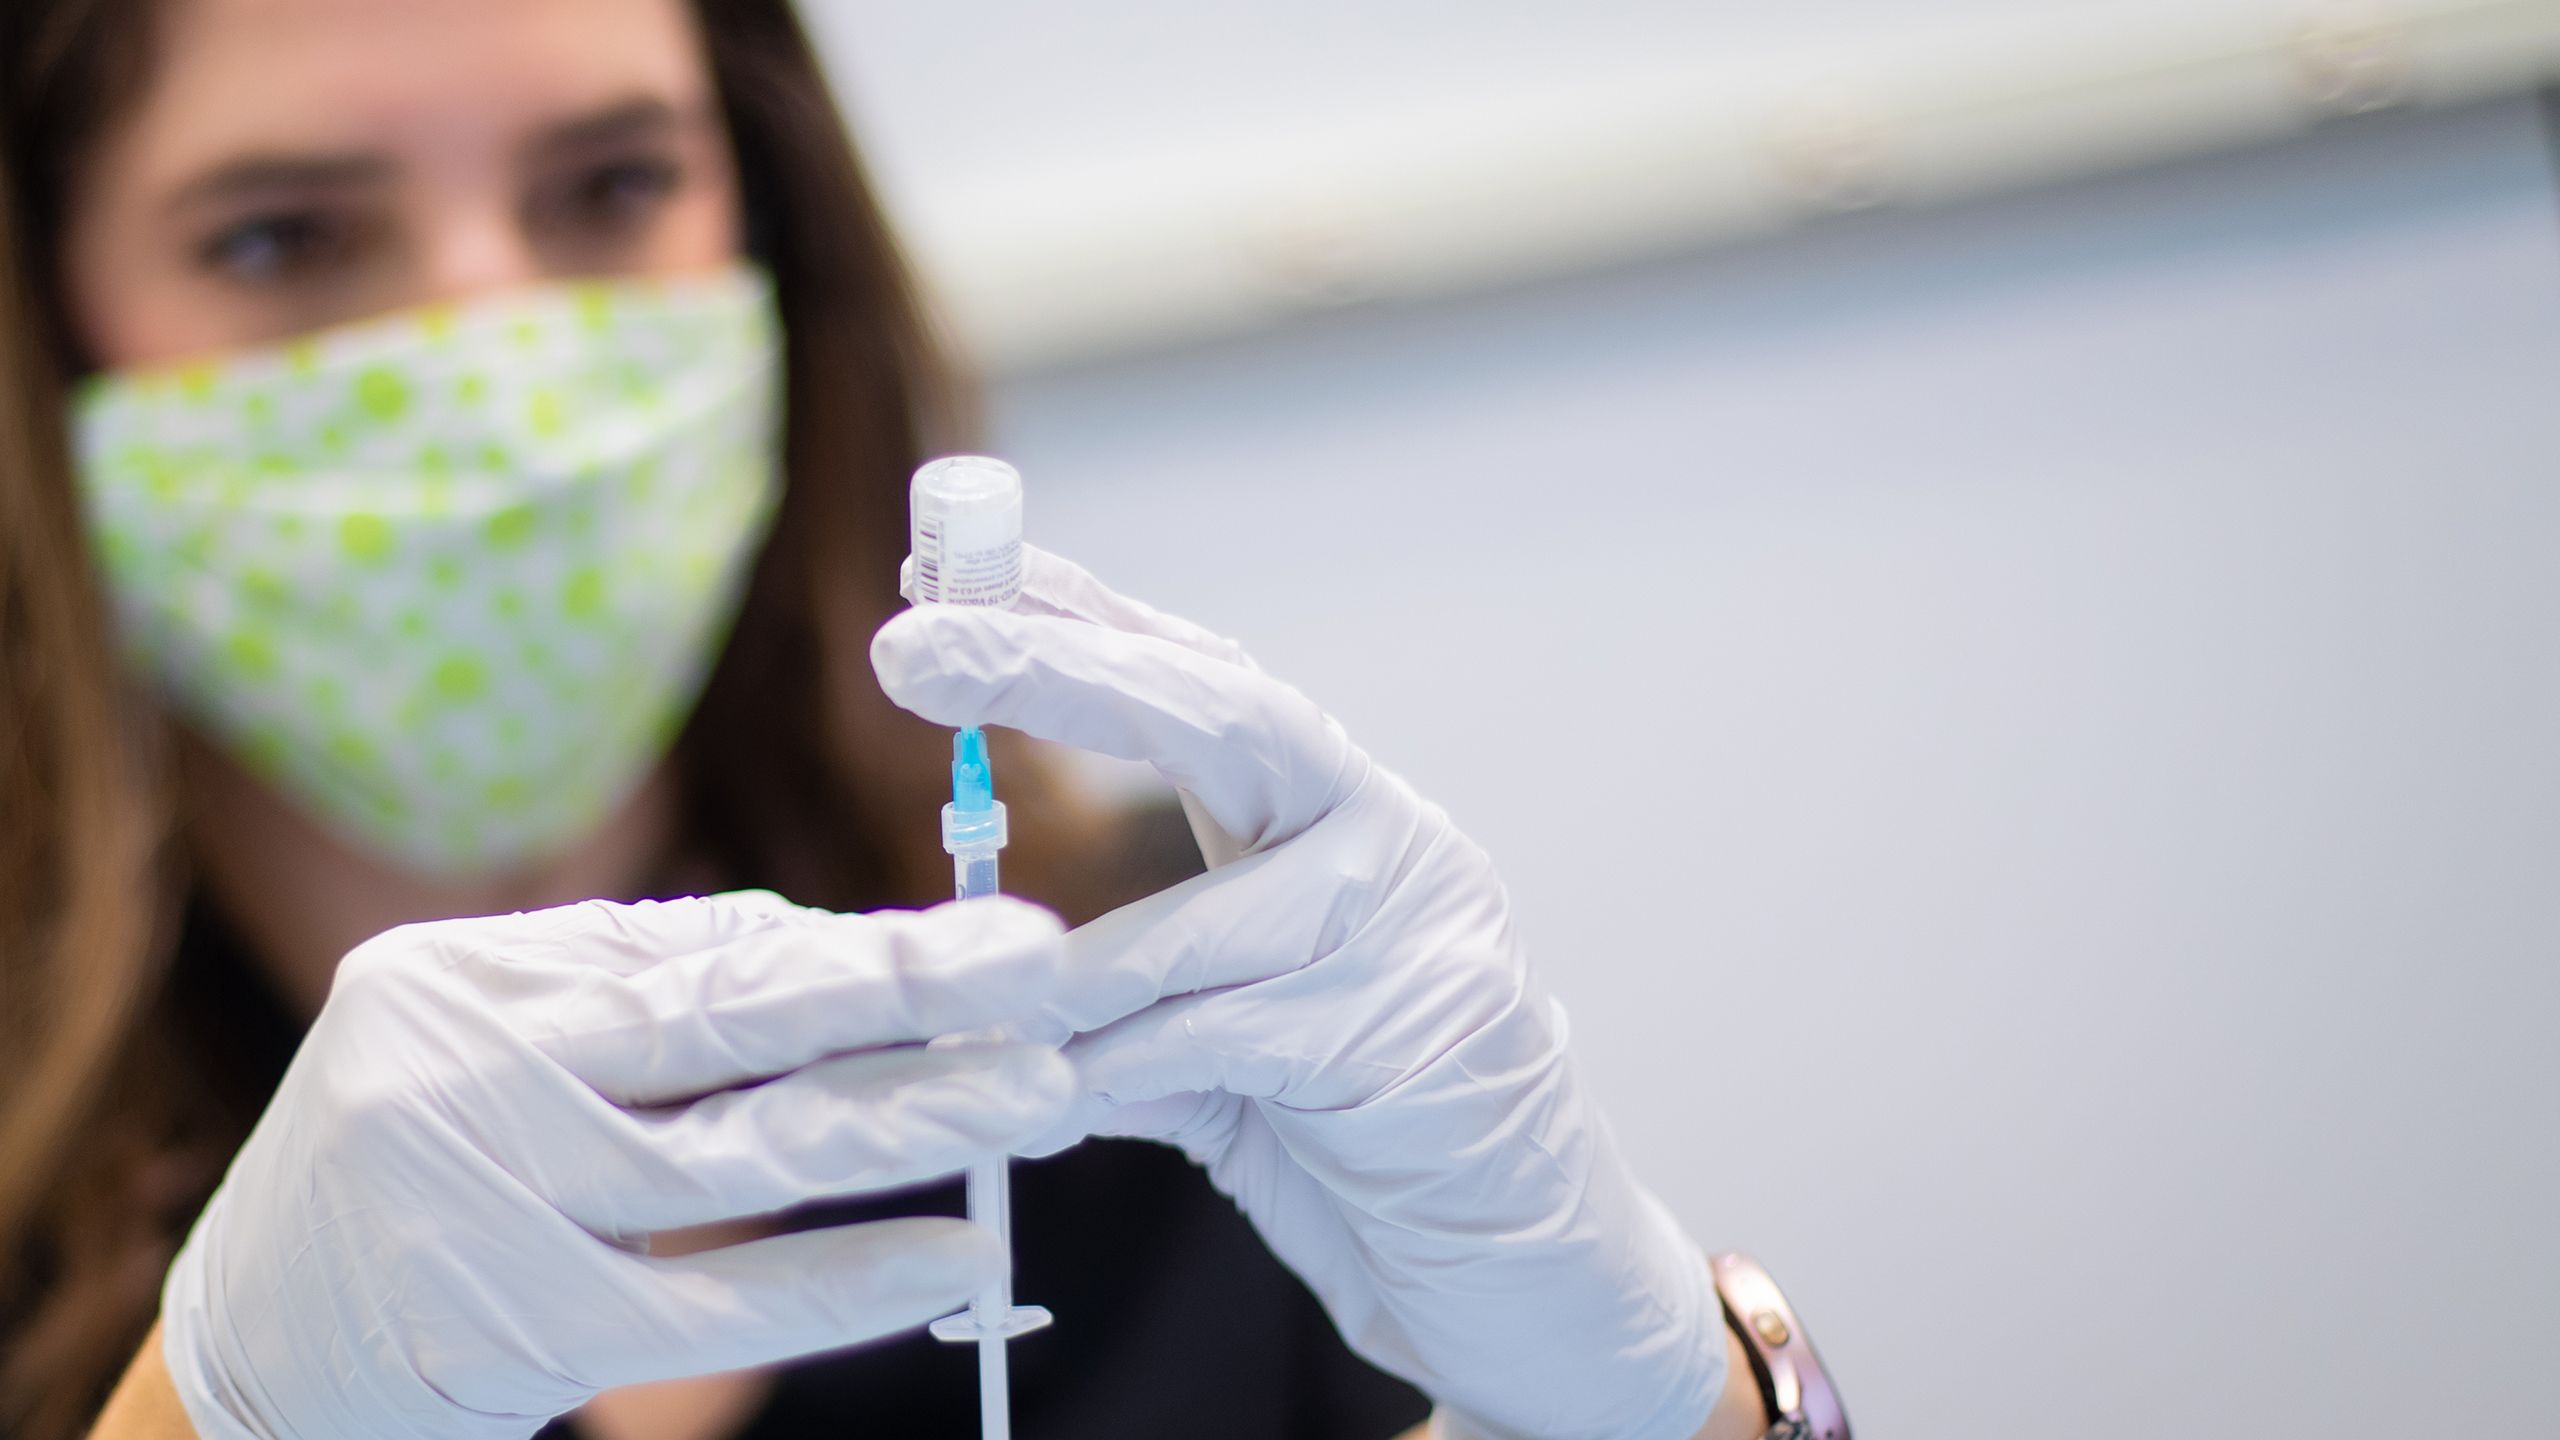 A woman in a mask and gloves draws a vaccine does into a syringe from a vial